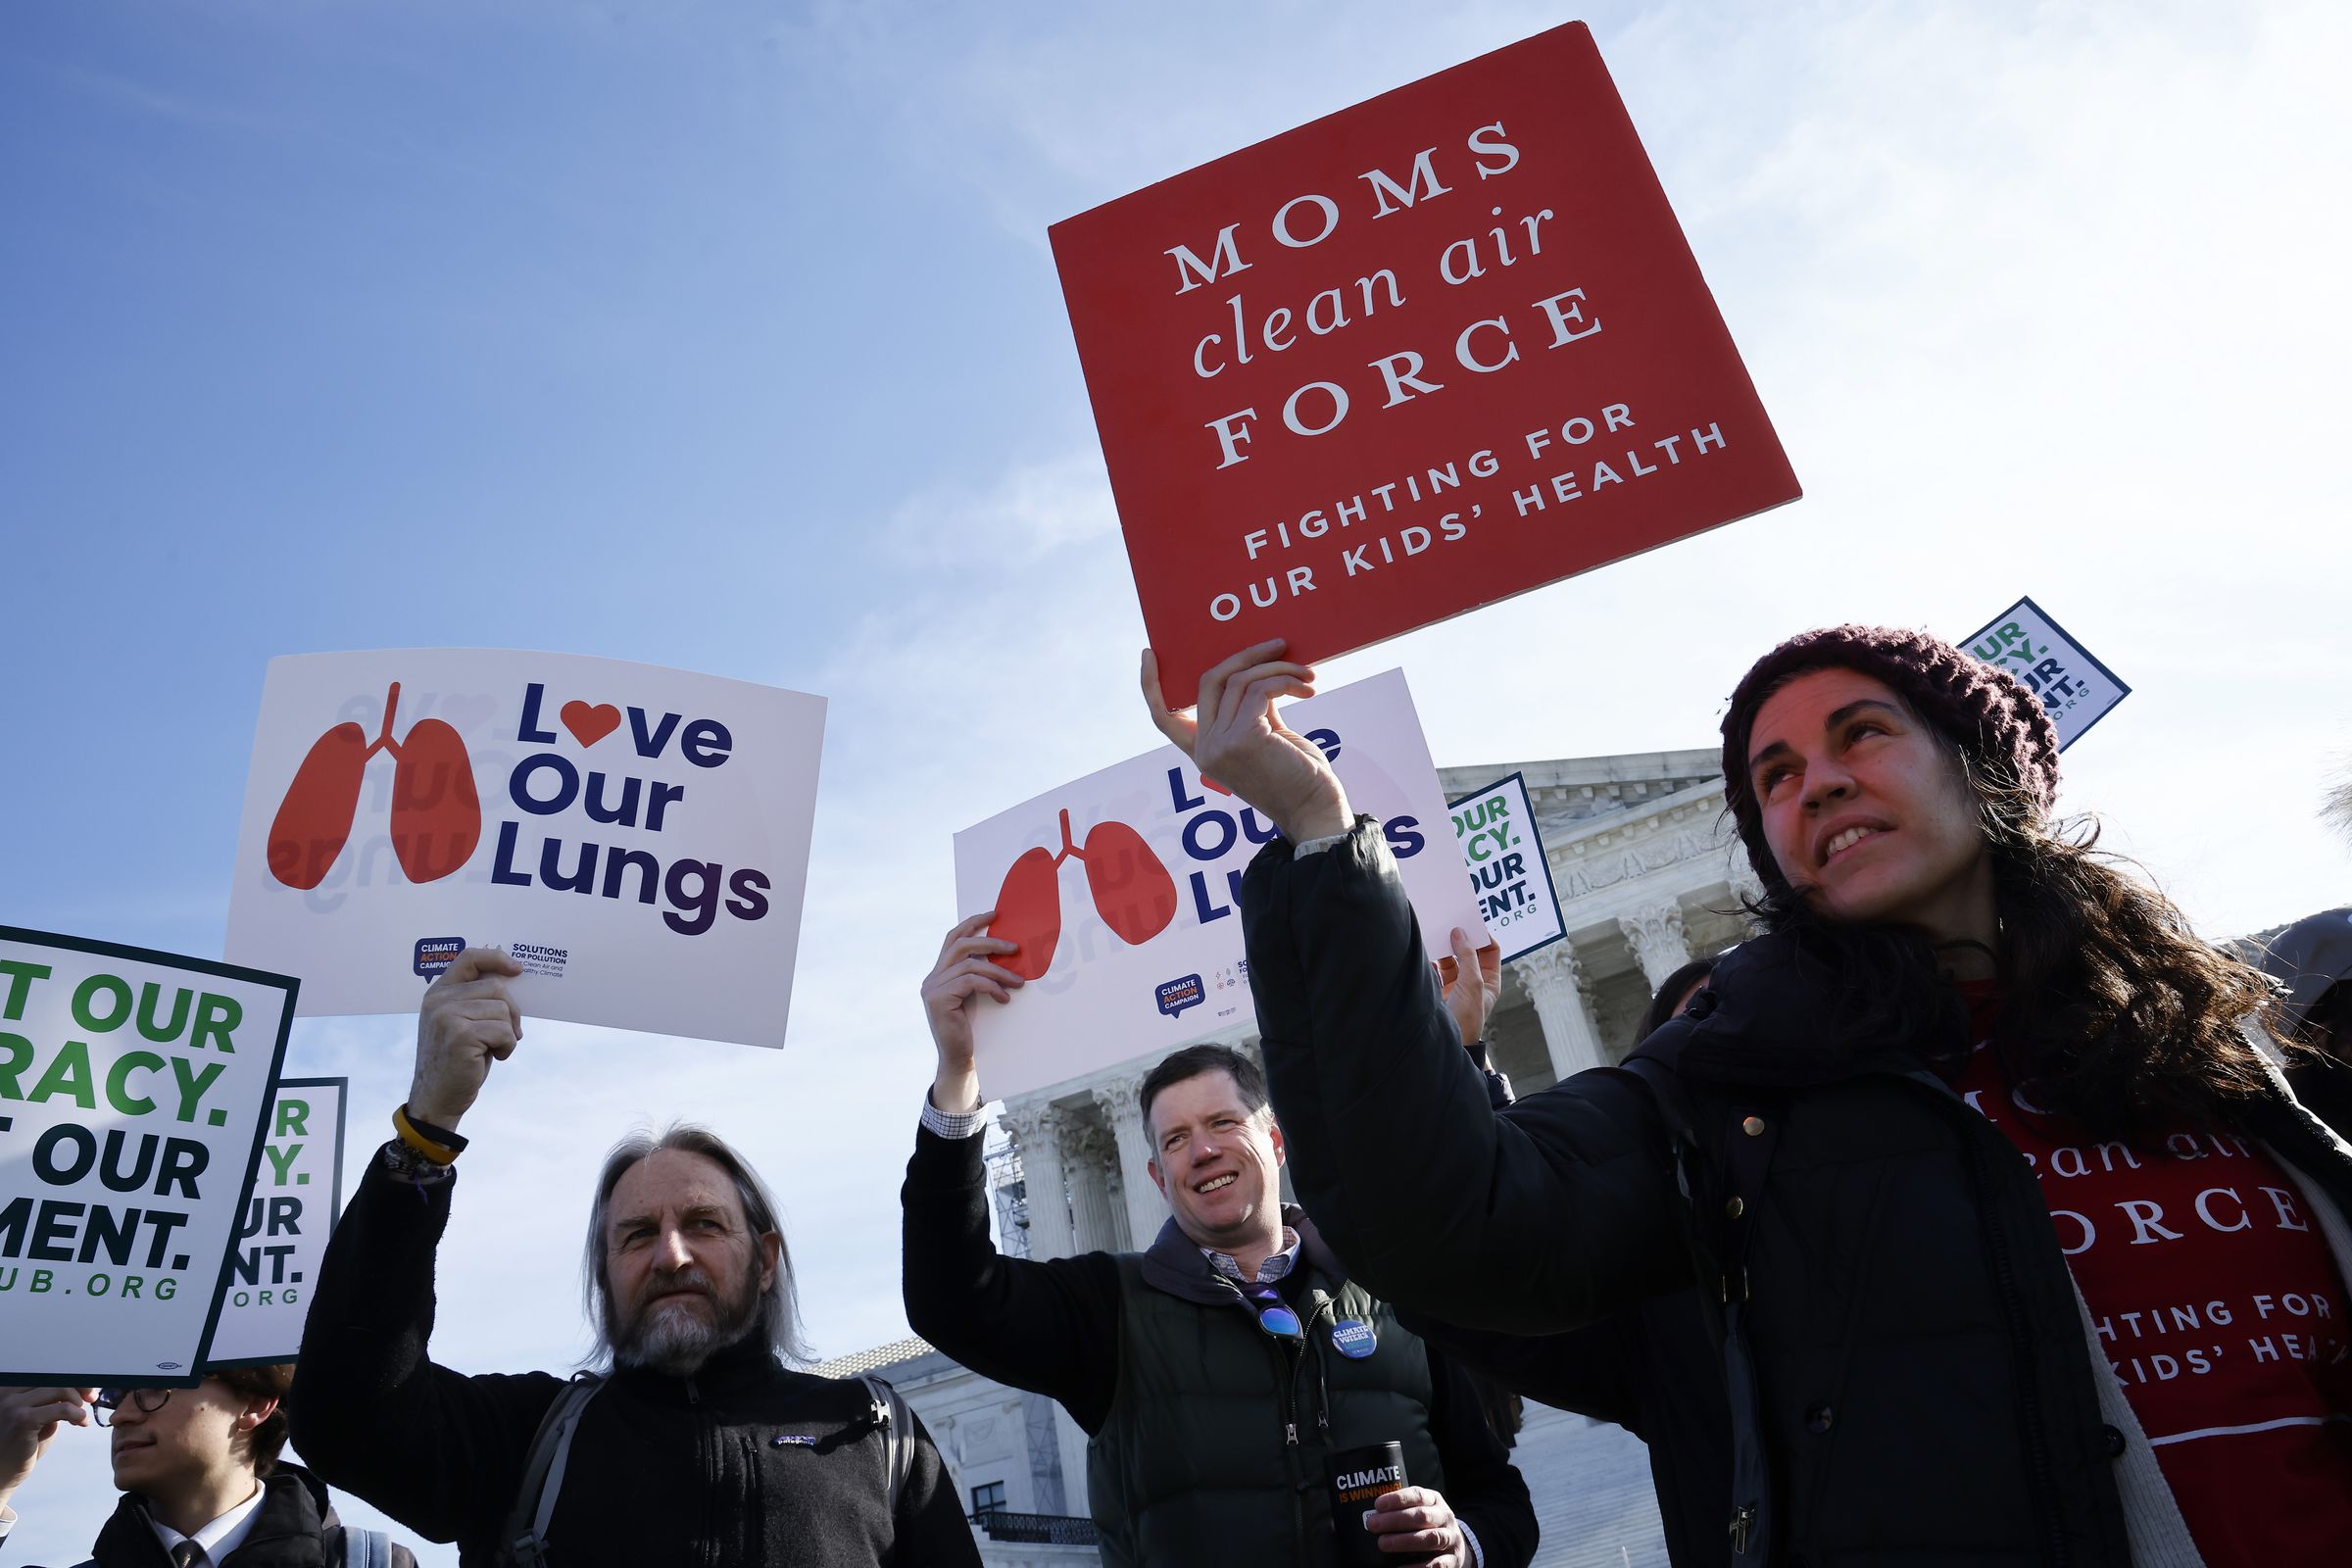 A group of protesters stand in front of the courthouse holding signs that say “Love our lungs” and “Moms Clean Air Task Force fighting for our kids’ health.”